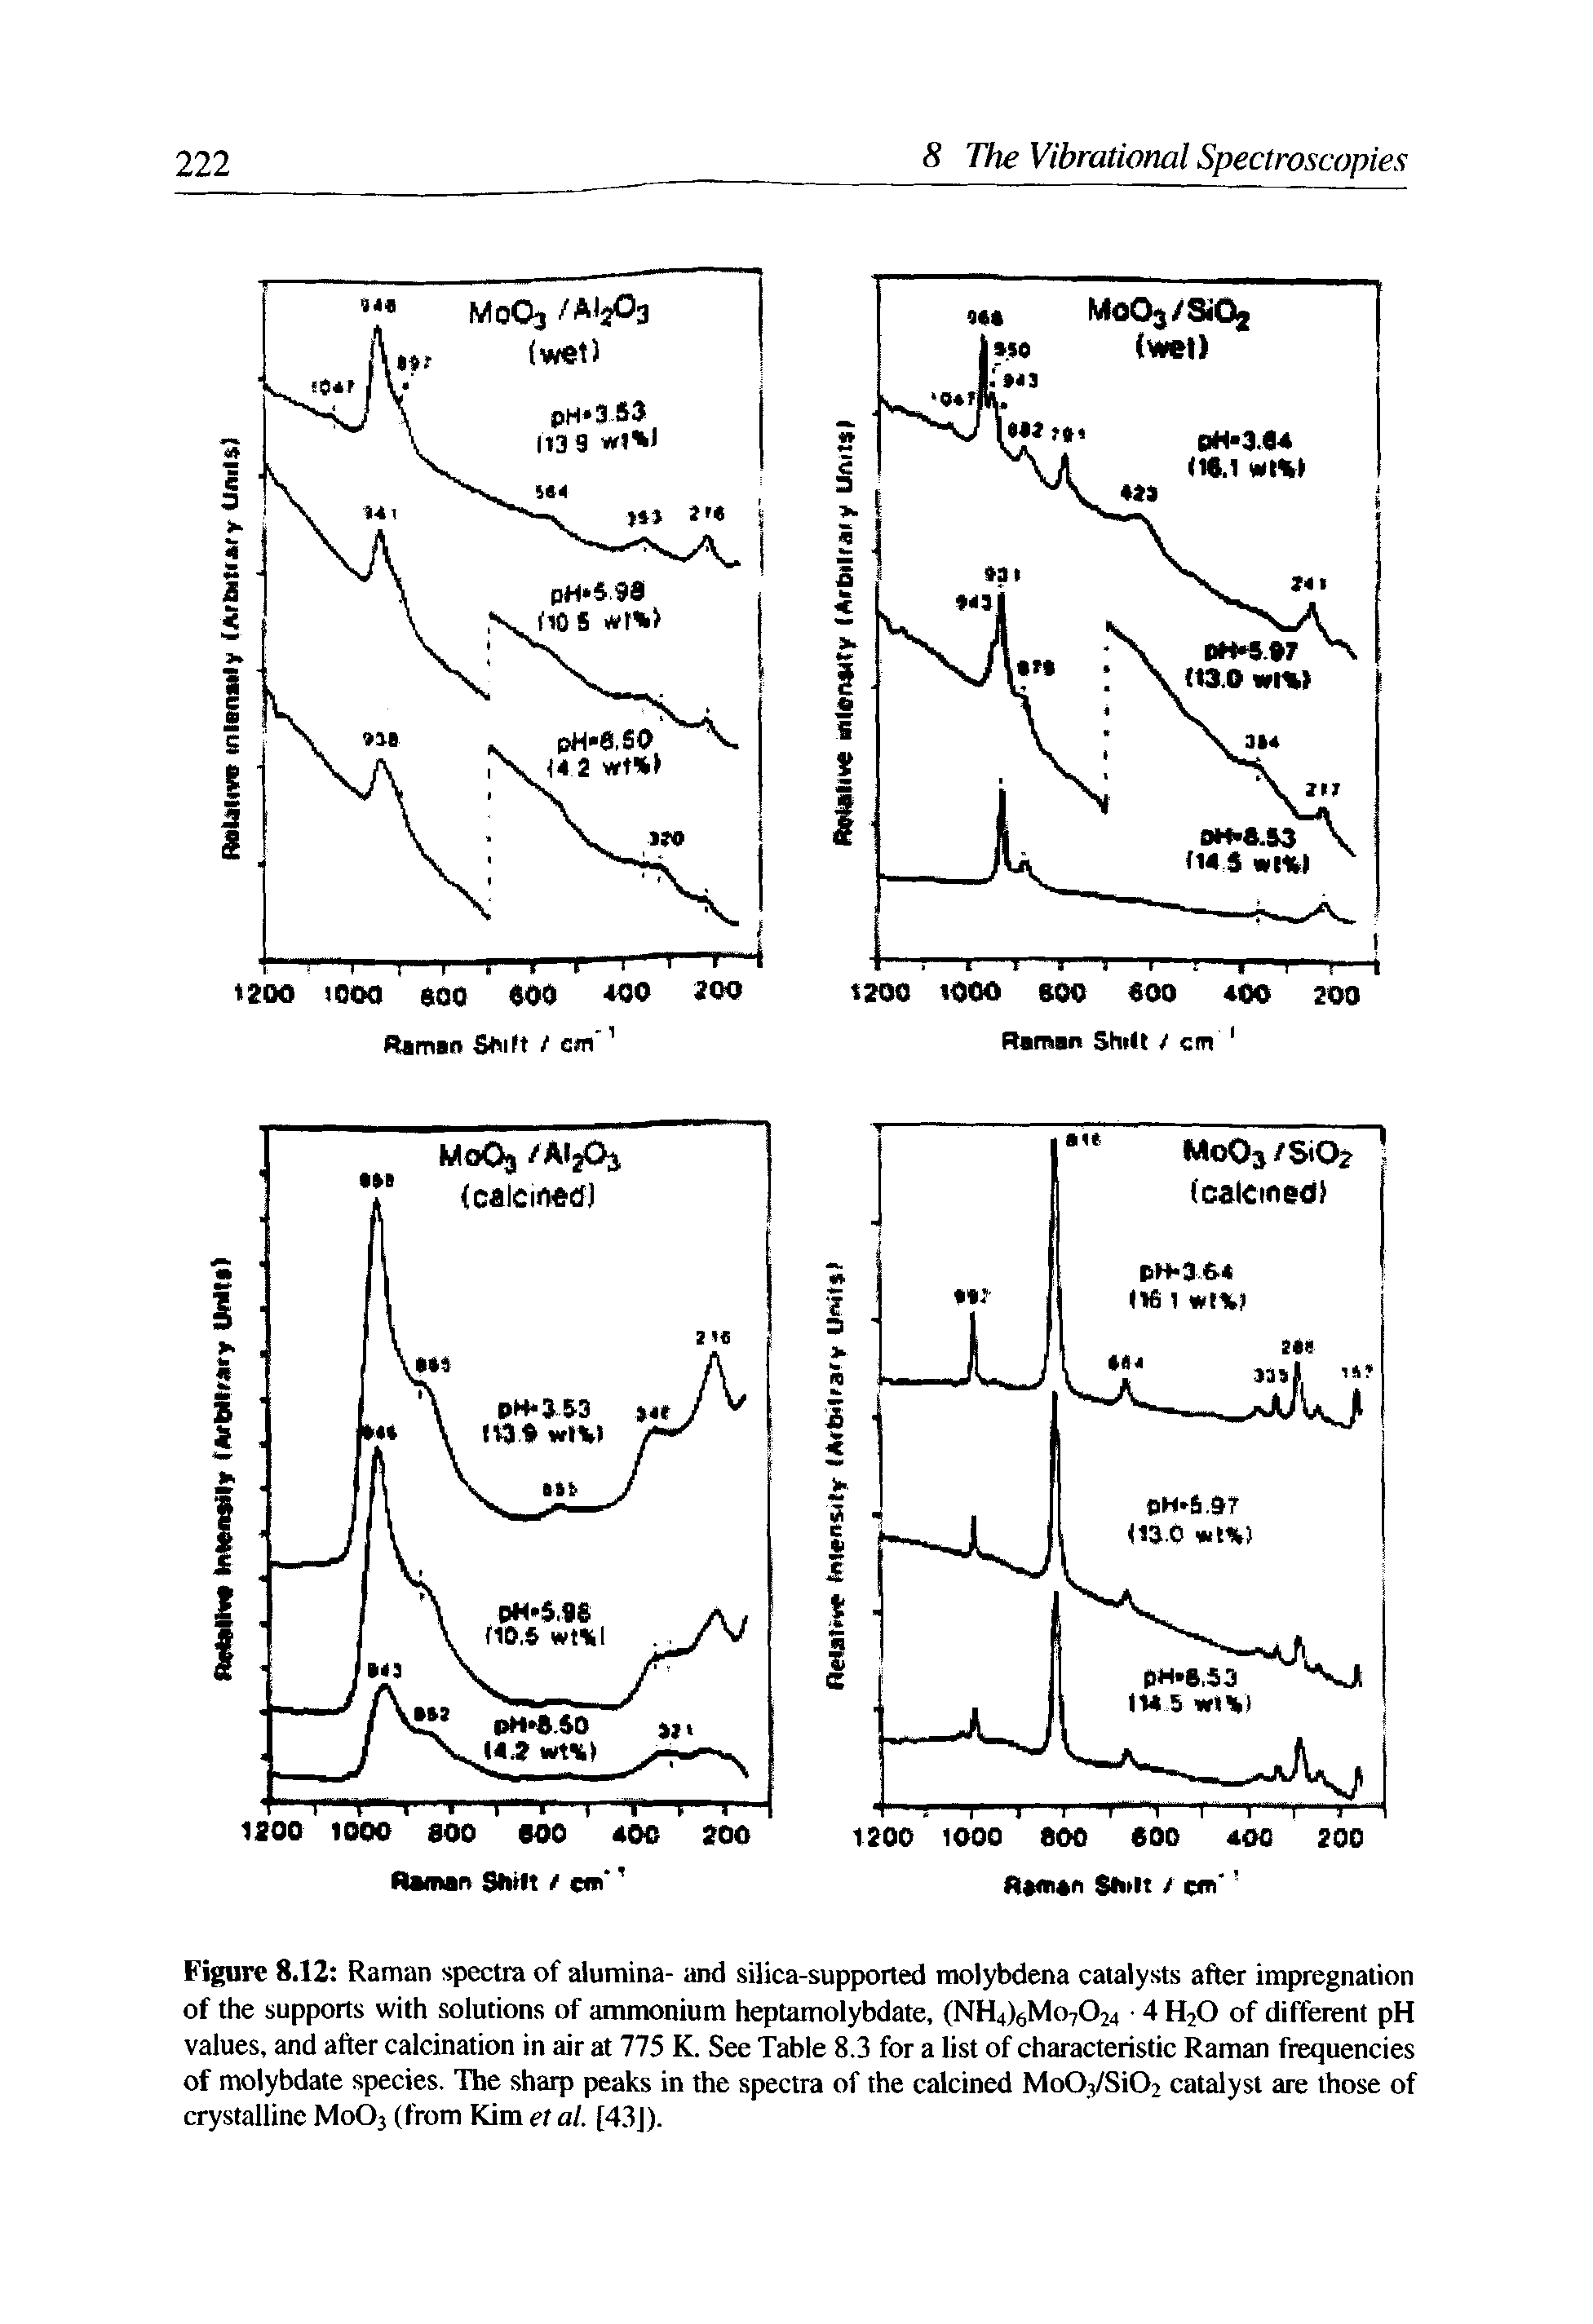 Figure 8.12 Raman spectra of alumina- and silica-supported molybdena catalysts after impregnation of the supports with solutions of ammonium heptamolybdate, (NH4)6Mo7024 4 H20 of different pH values, and after calcination in air at 775 K. See Table 8.3 for a list of characteristic Raman frequencies of molybdate species. The sharp peaks in the spectra of the calcined MoOySiOj catalyst are those of crystalline Mo03 (from Kim el at. [43J).